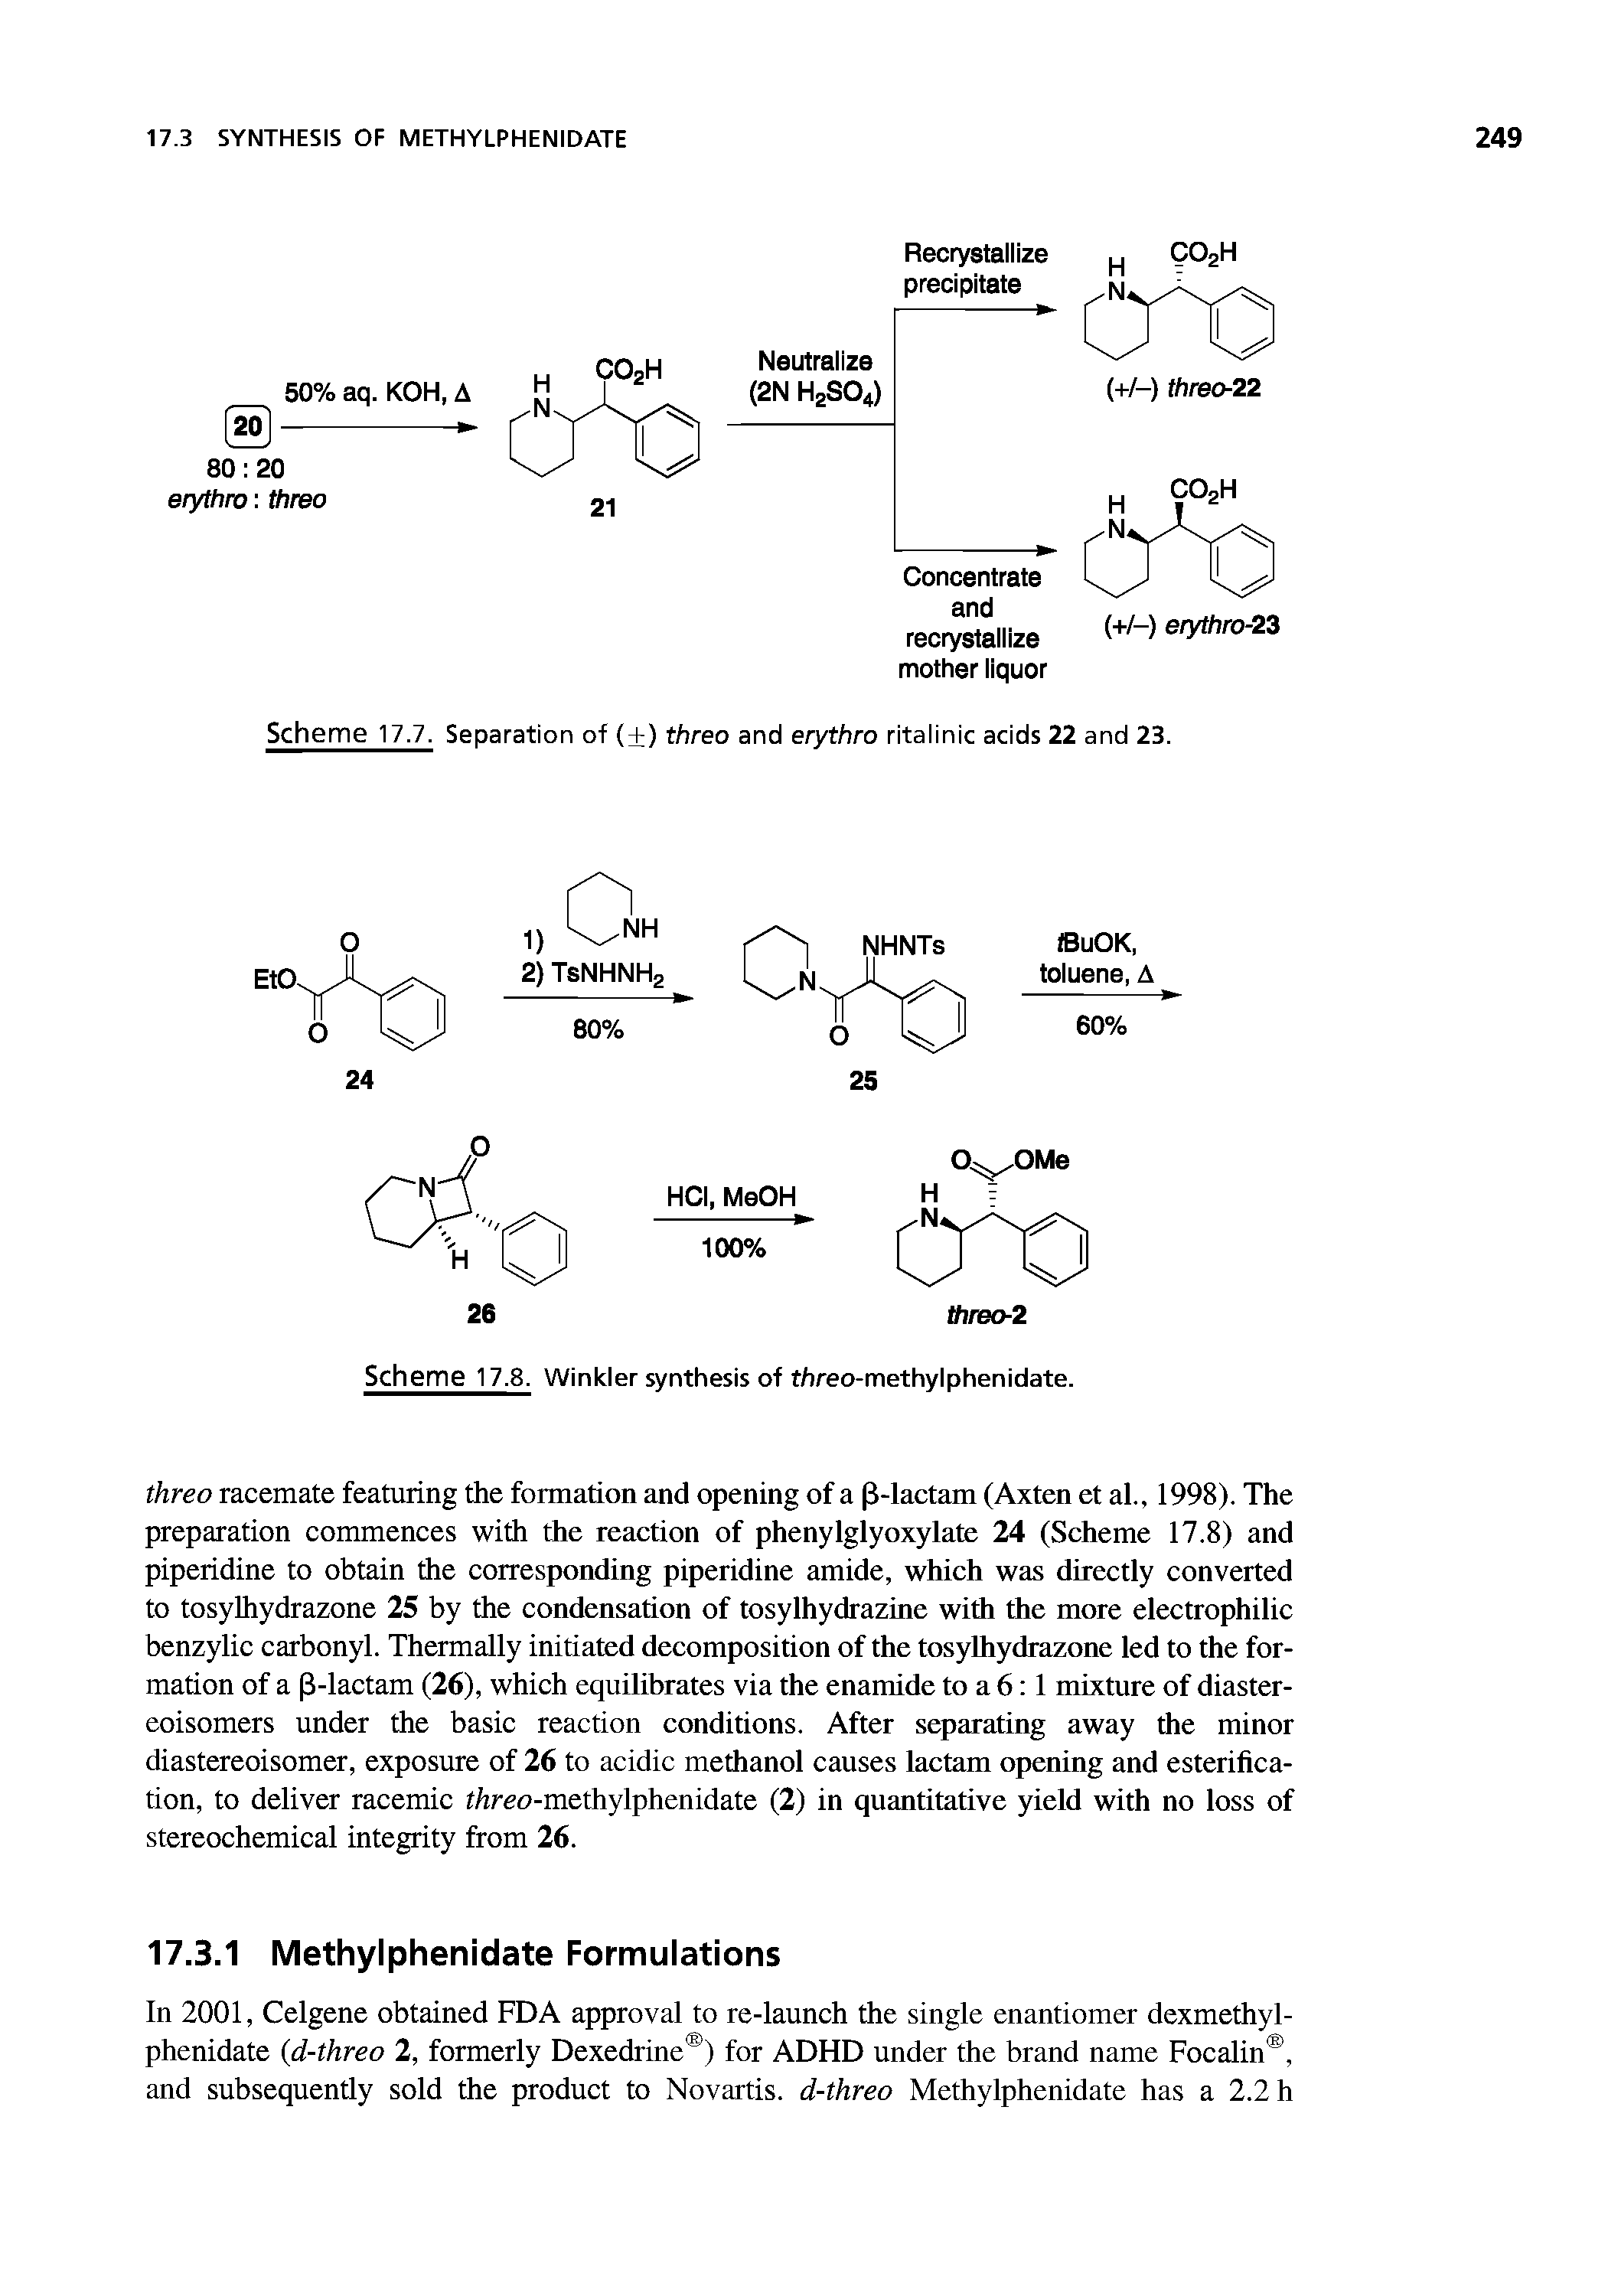 Scheme 17.7. Separation of (+) threo and erythro ritalinic acids 22 and 23.